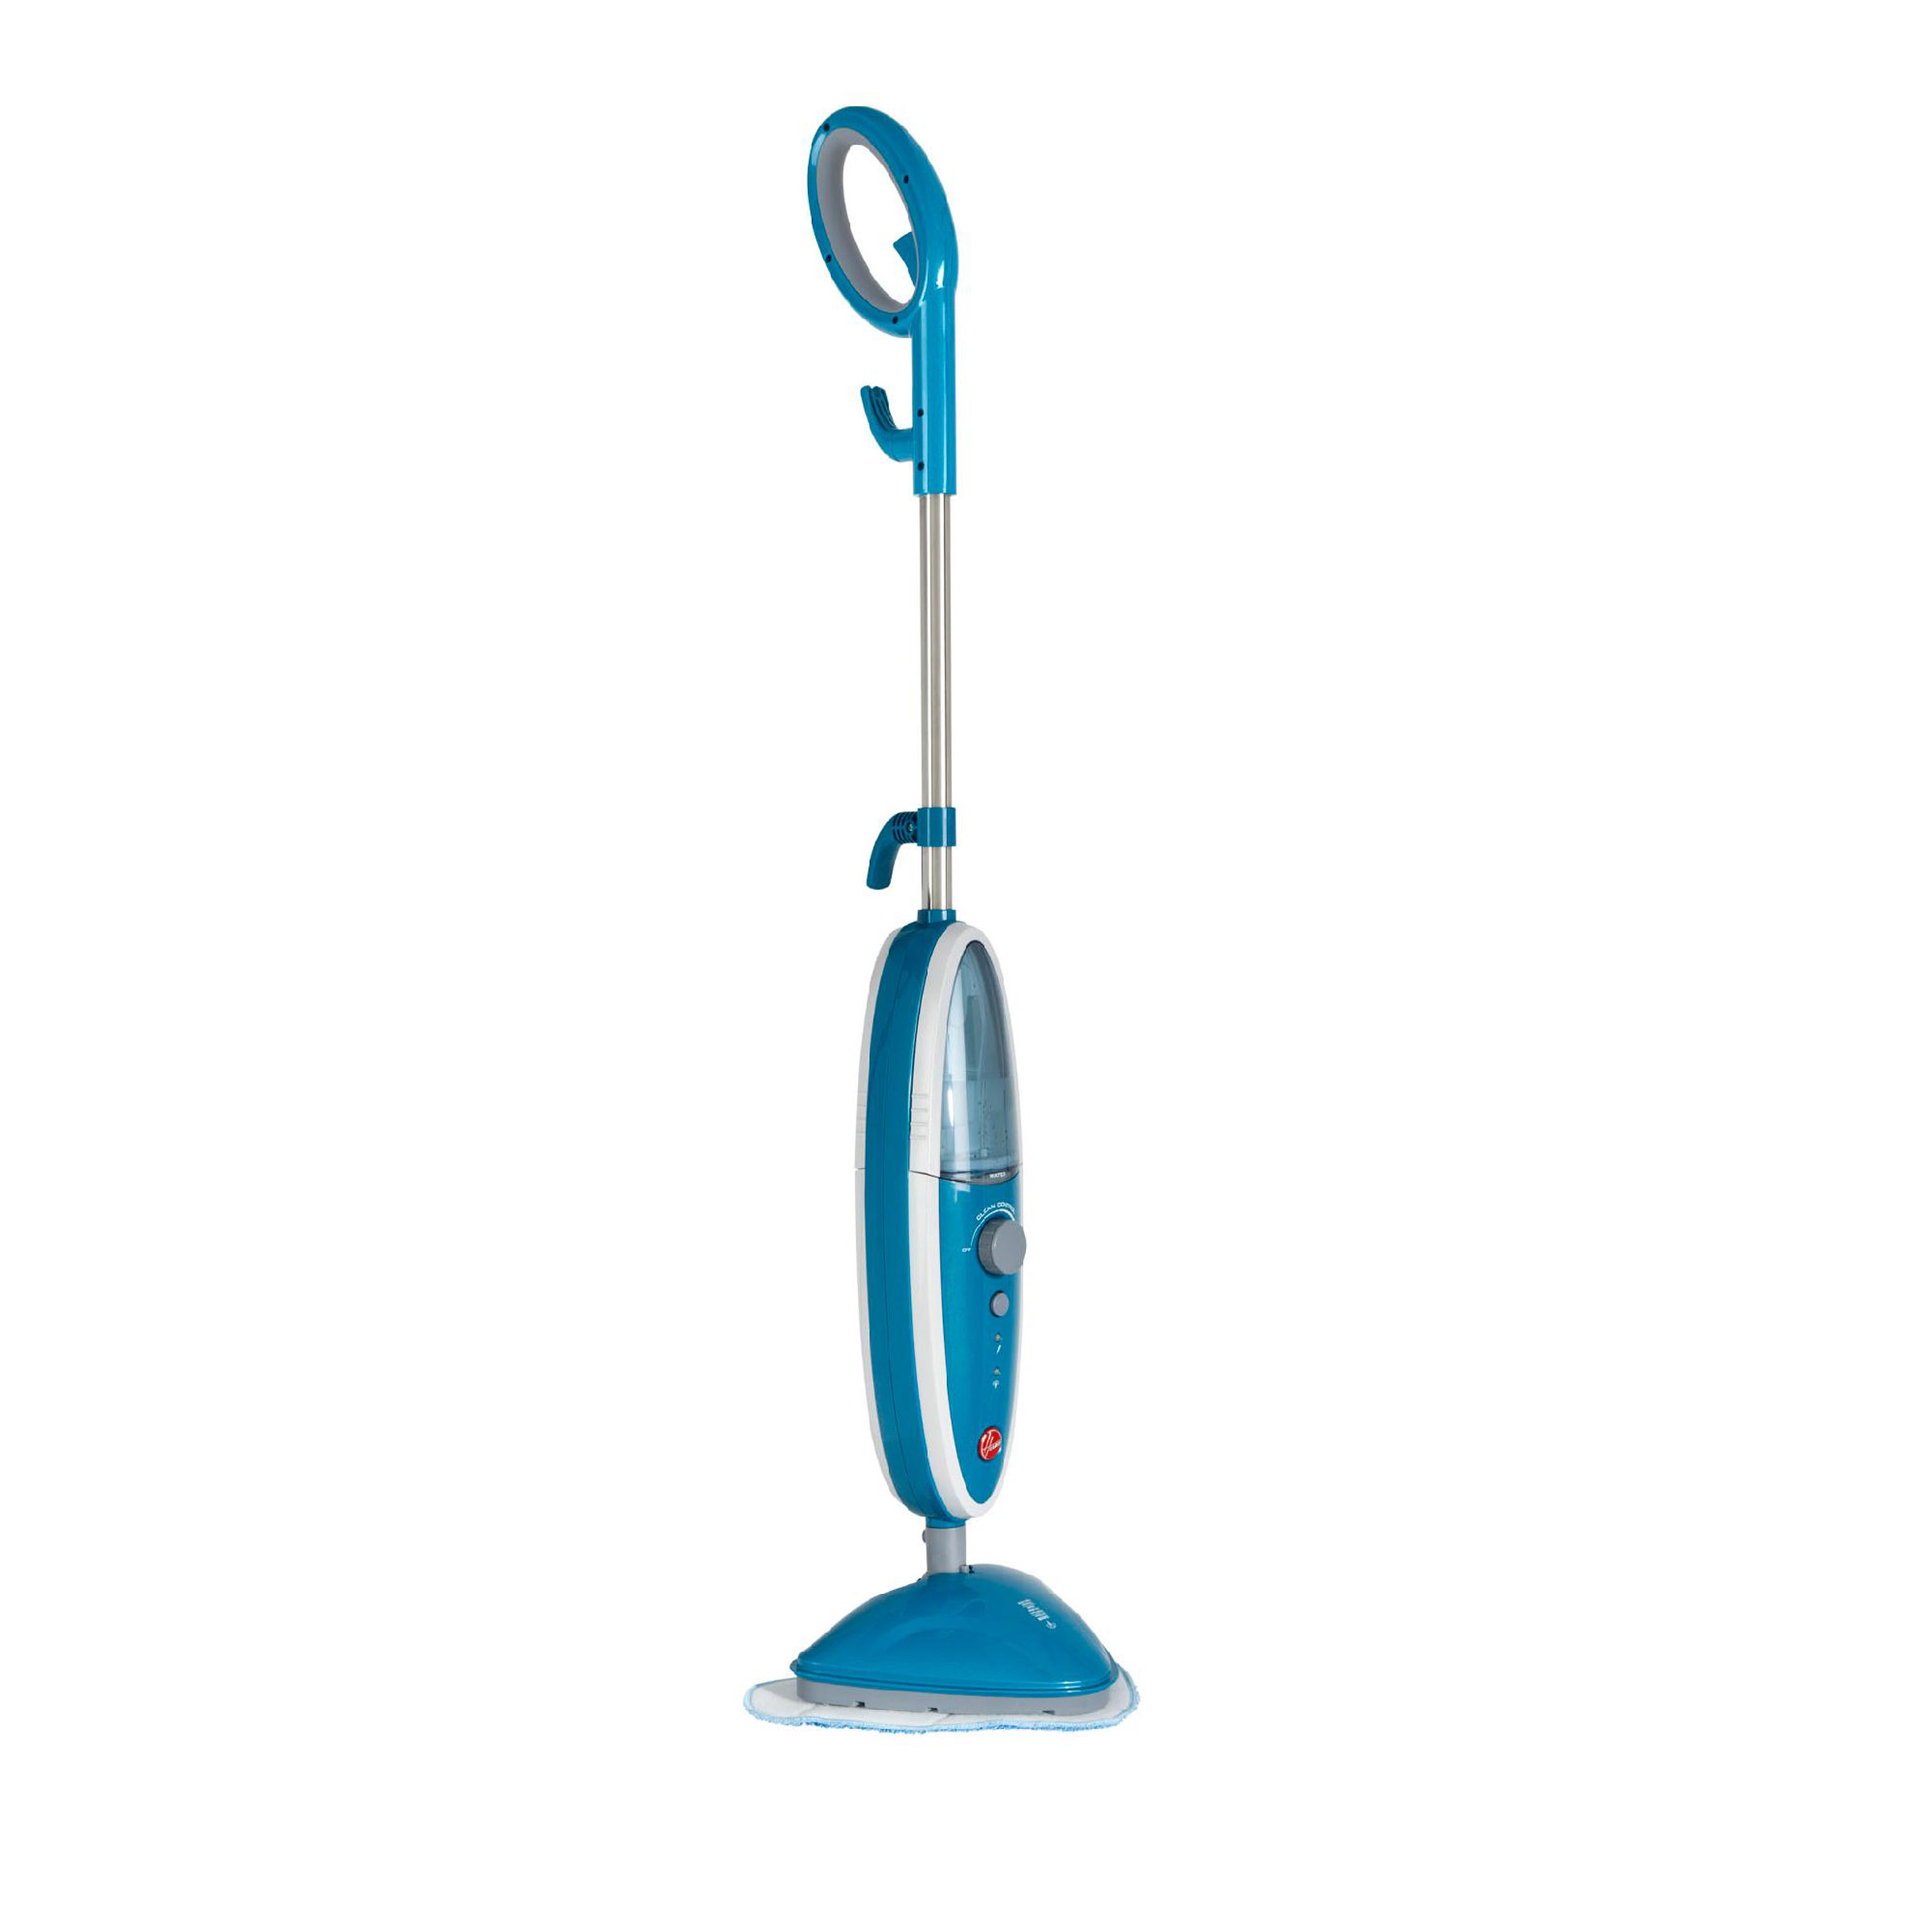 Hoover Steam Mop TwinTank Steam Cleaner WH20200 blue